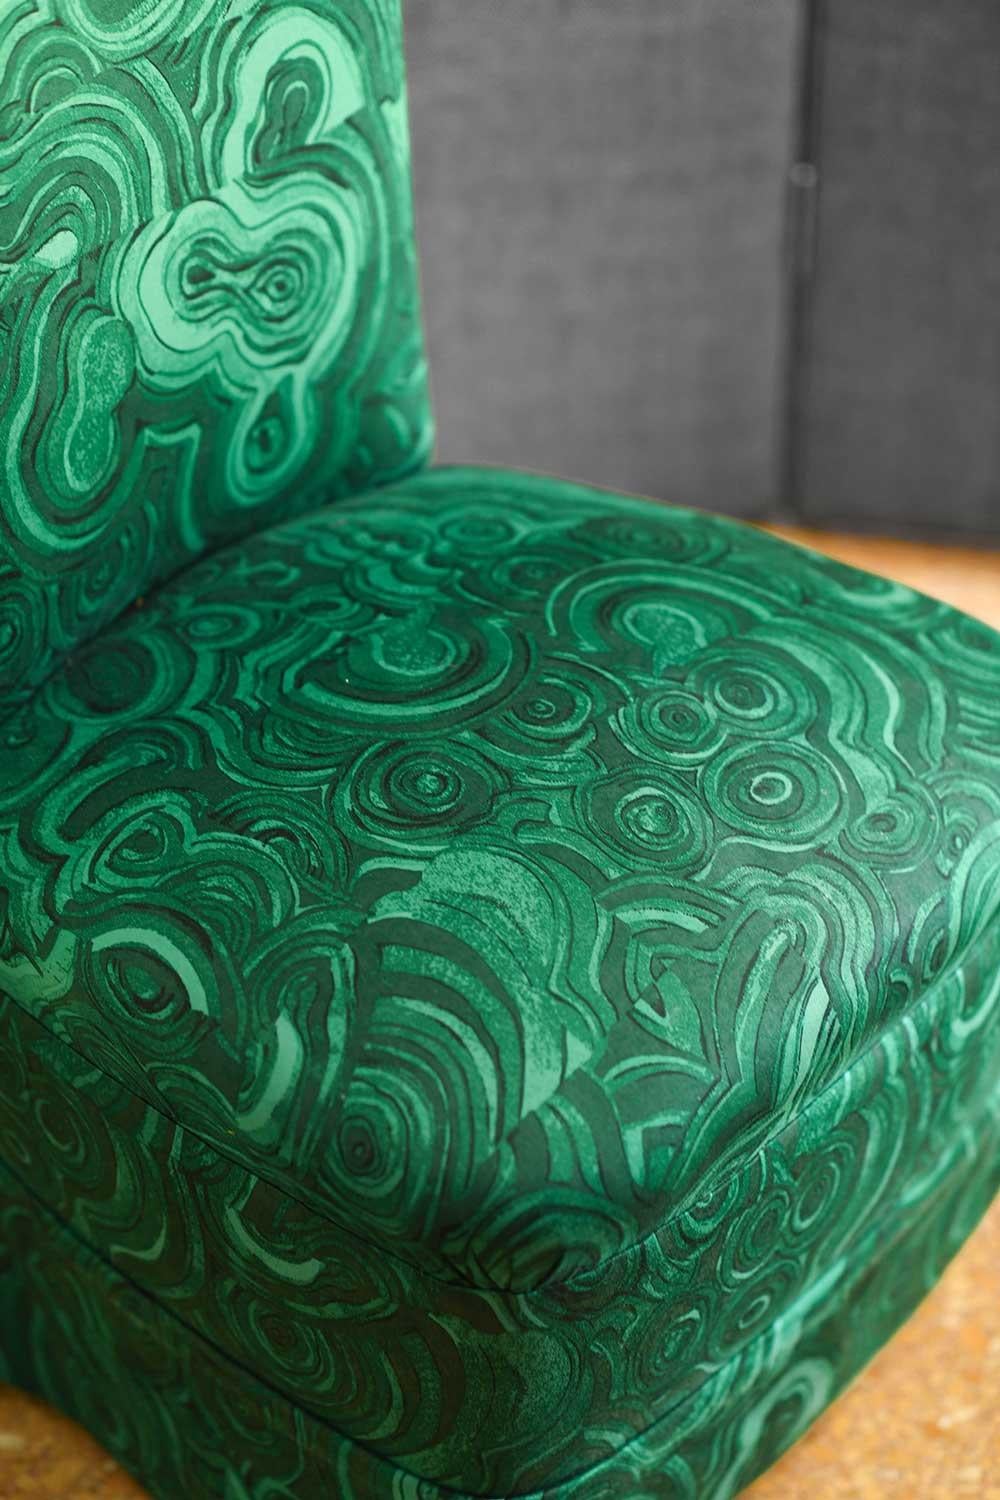 European Pair of Armchairs in Malachite green gemstone fabric by Tony Duquette